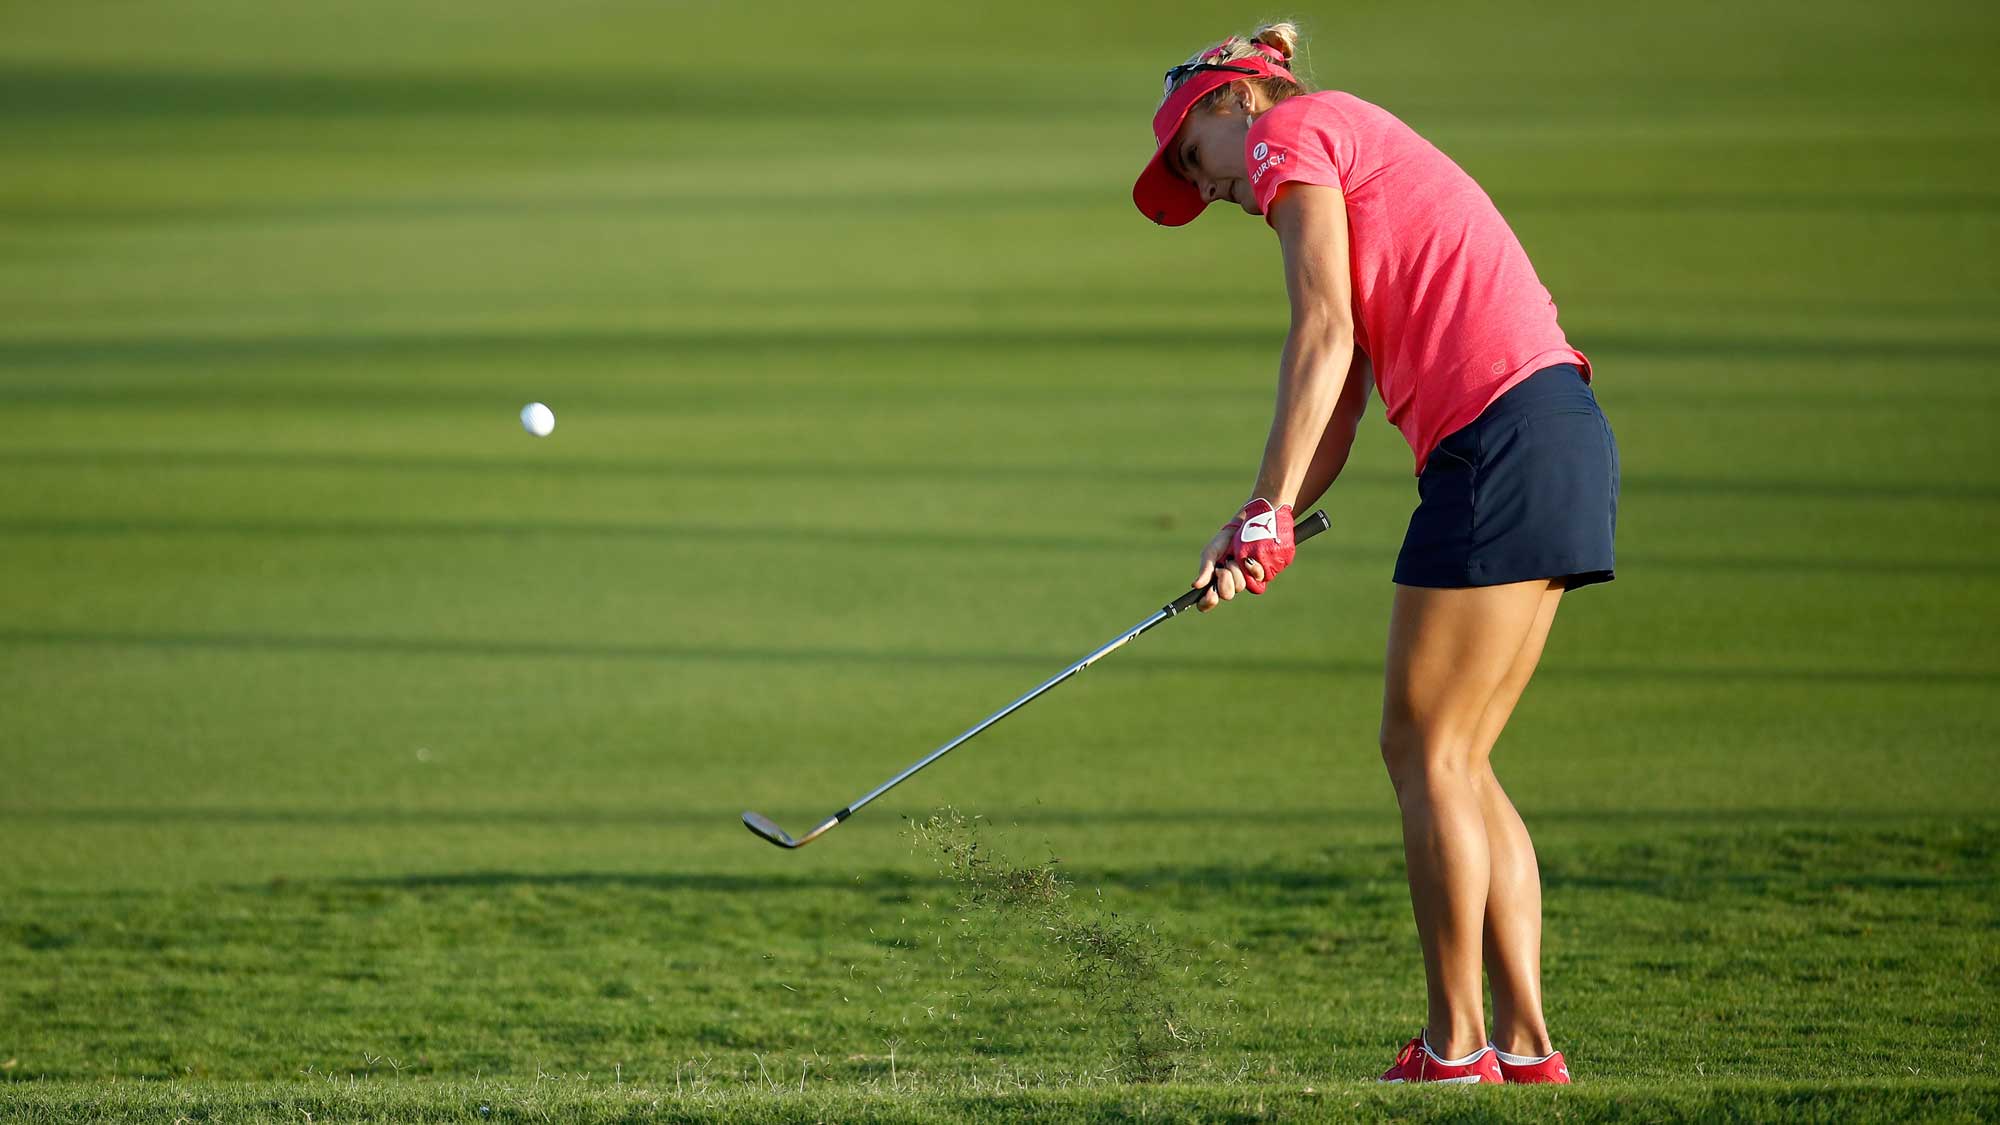 Lexi Thompson hits her third shot on the 15th hole during the second round of the Pure Silk Bahamas LPGA Classic